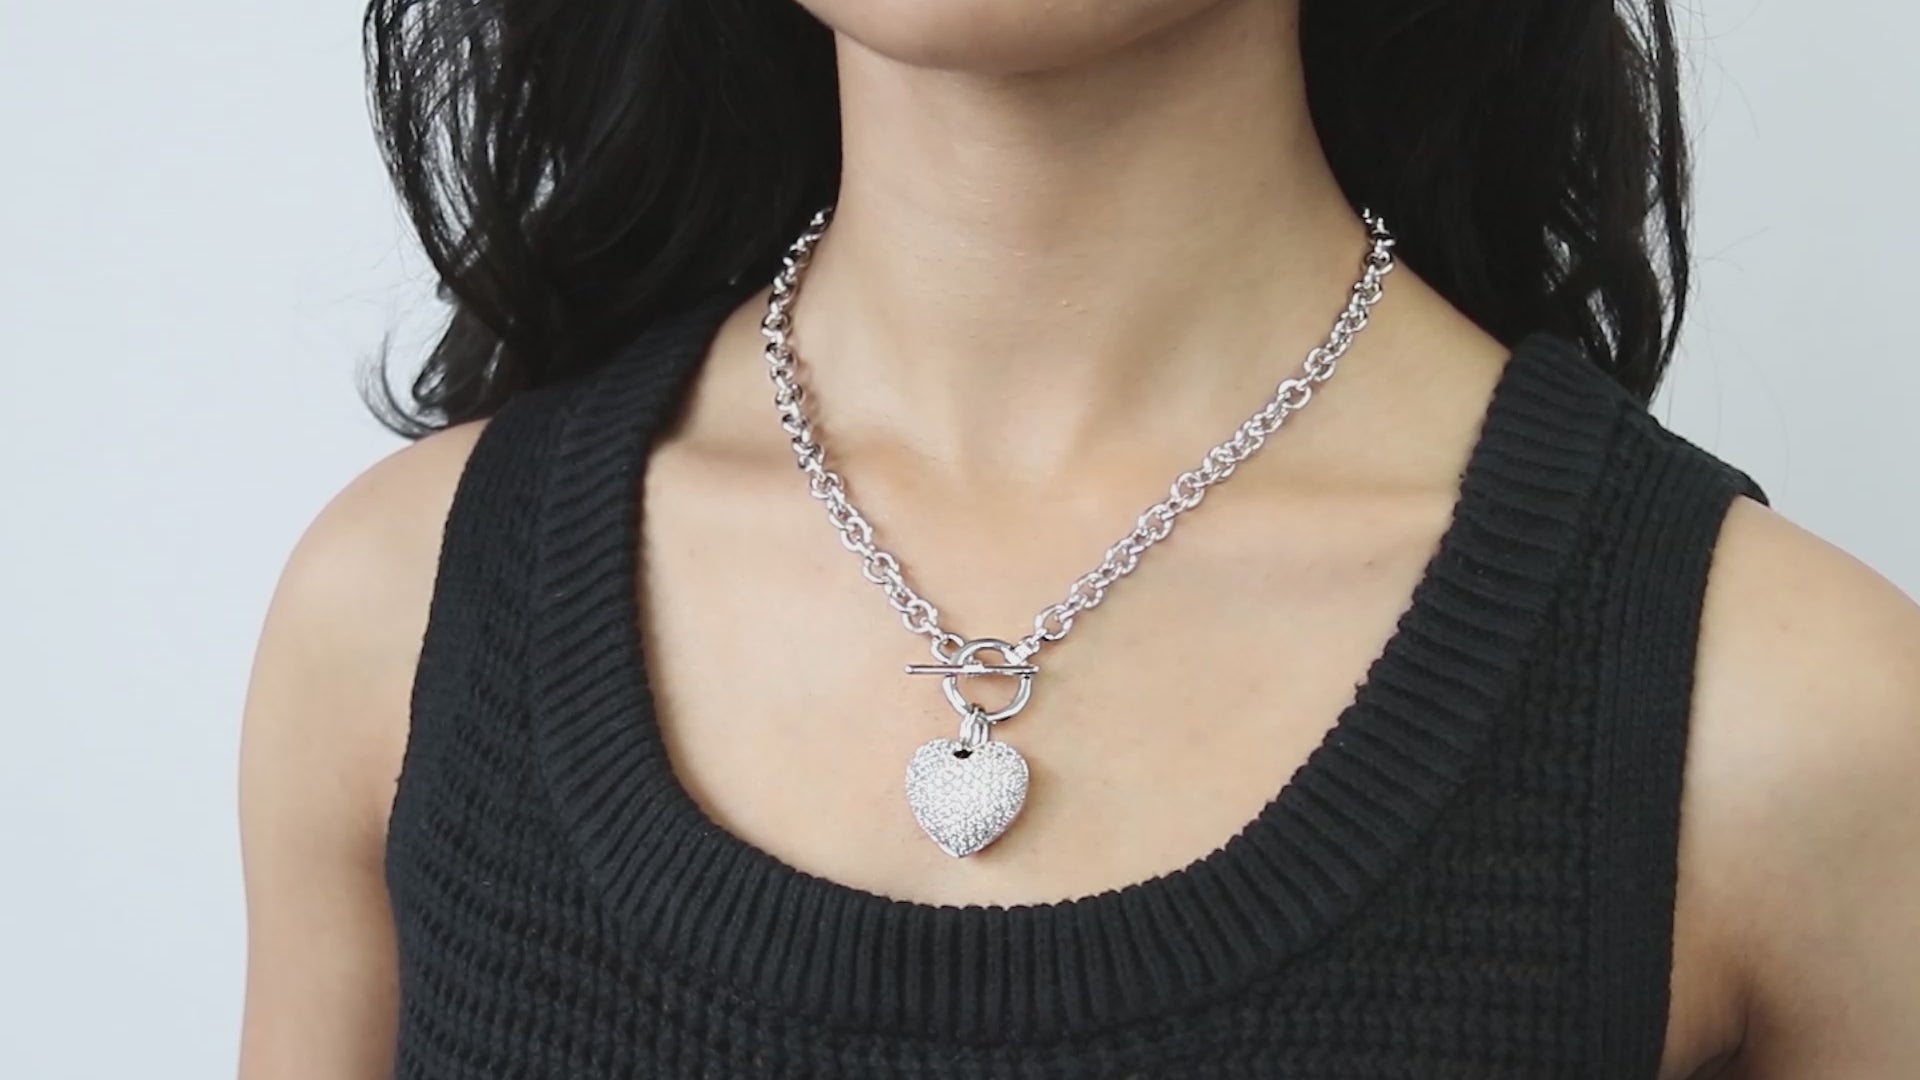 Video Contains Heart CZ Necklace and Earrings Set in Silver-Tone. Style Number VS350-01